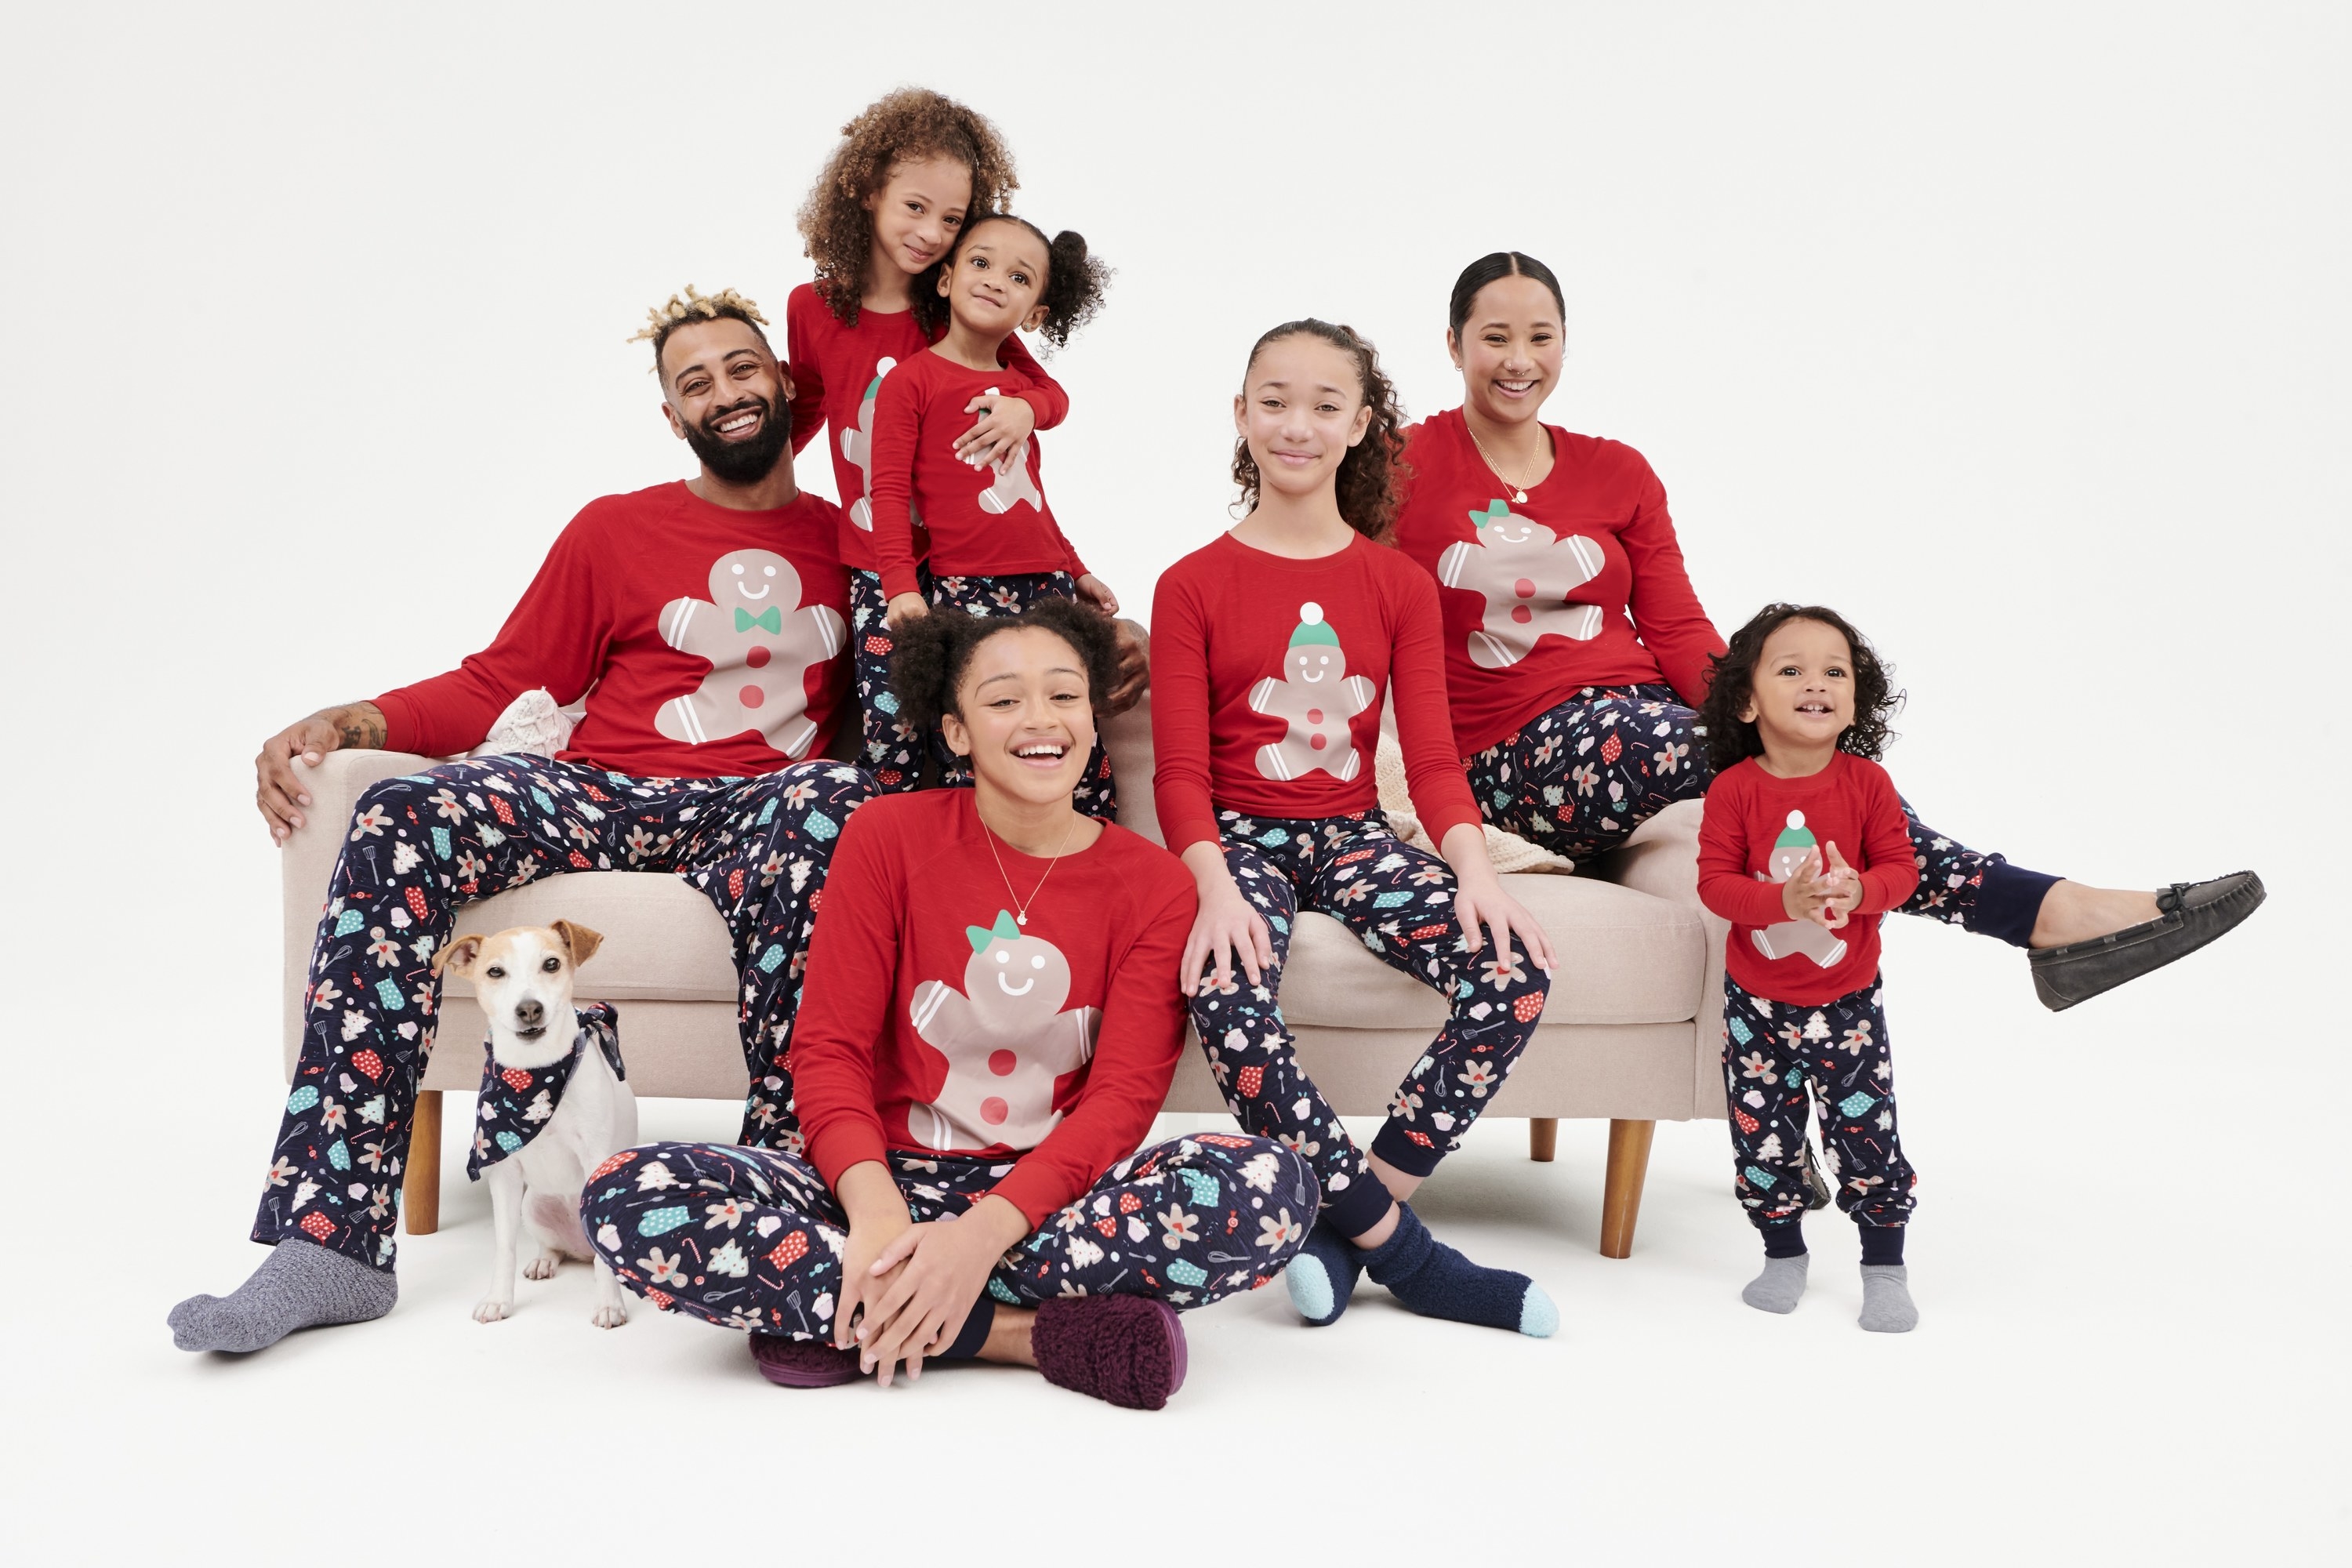 parents, children of all ages, and a dog in matching pajamas with gingerbread men on them